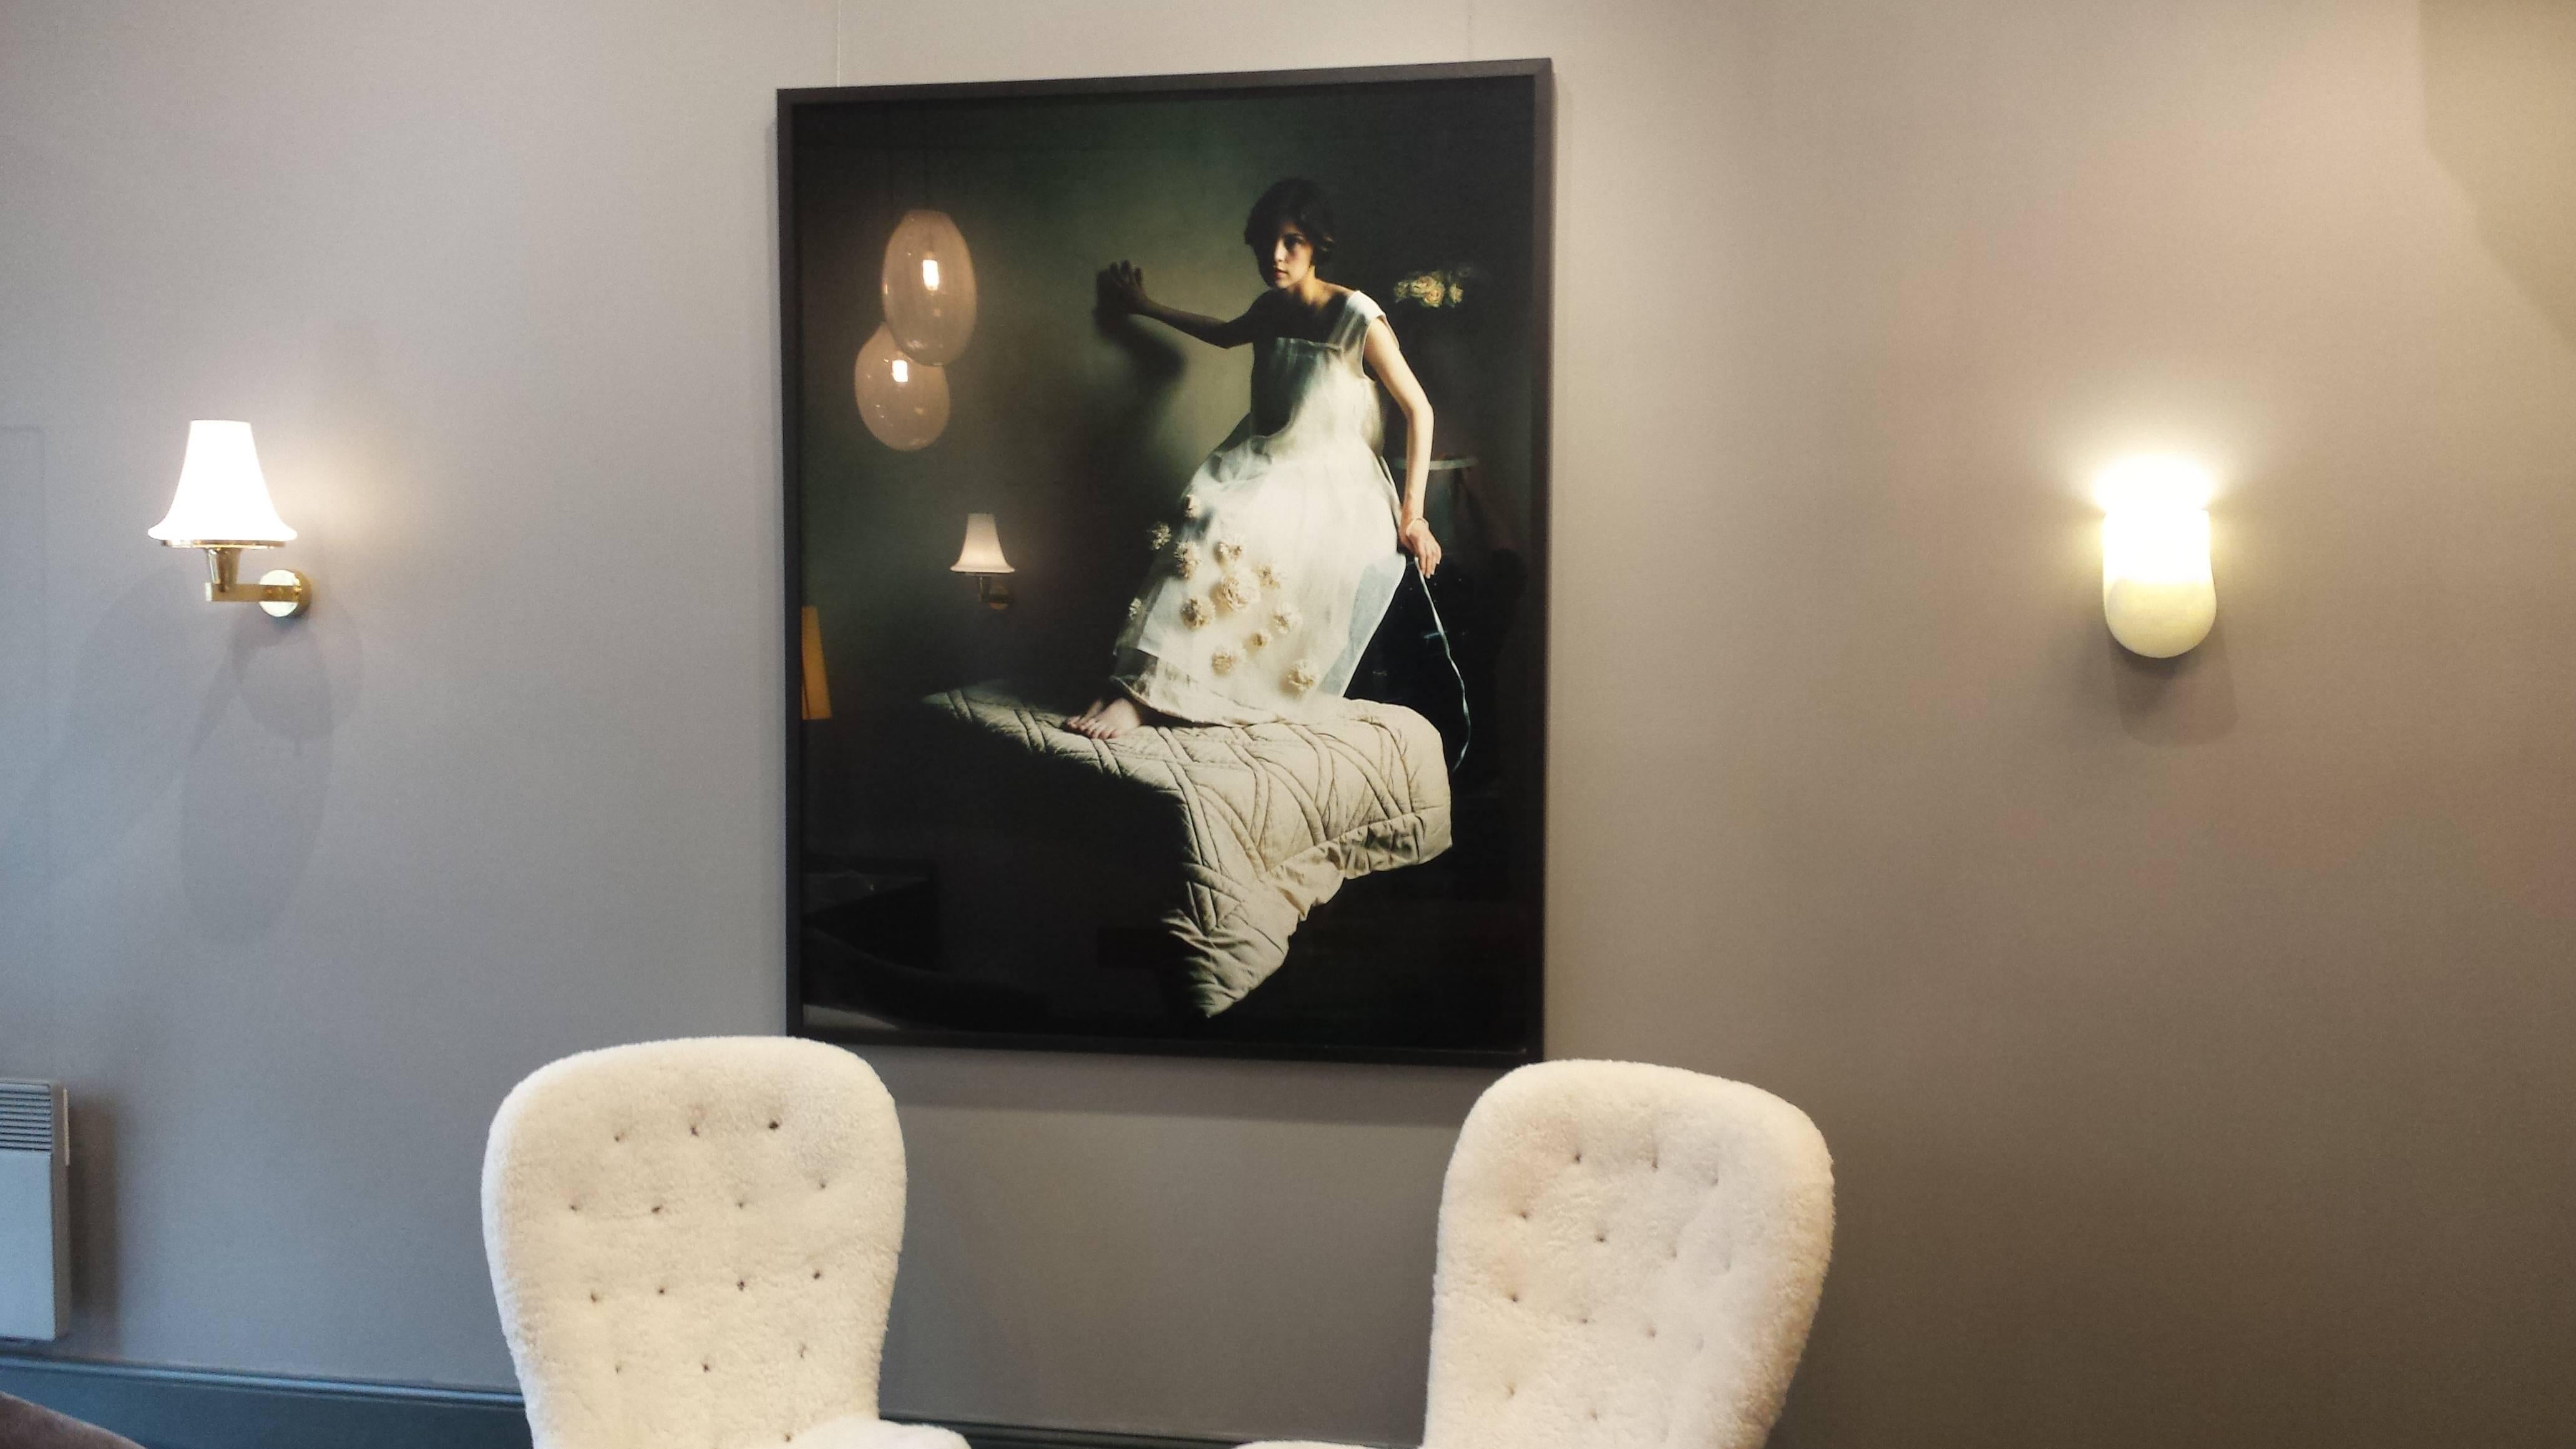 Photograph entitled “The Wedding Dress,” by Diana Lui, 2001.

Silver print, photographic chamber 20 x 25 cm, color negative. Edition #4 / 10.

Authenticity certificate on the back, signed and dated.